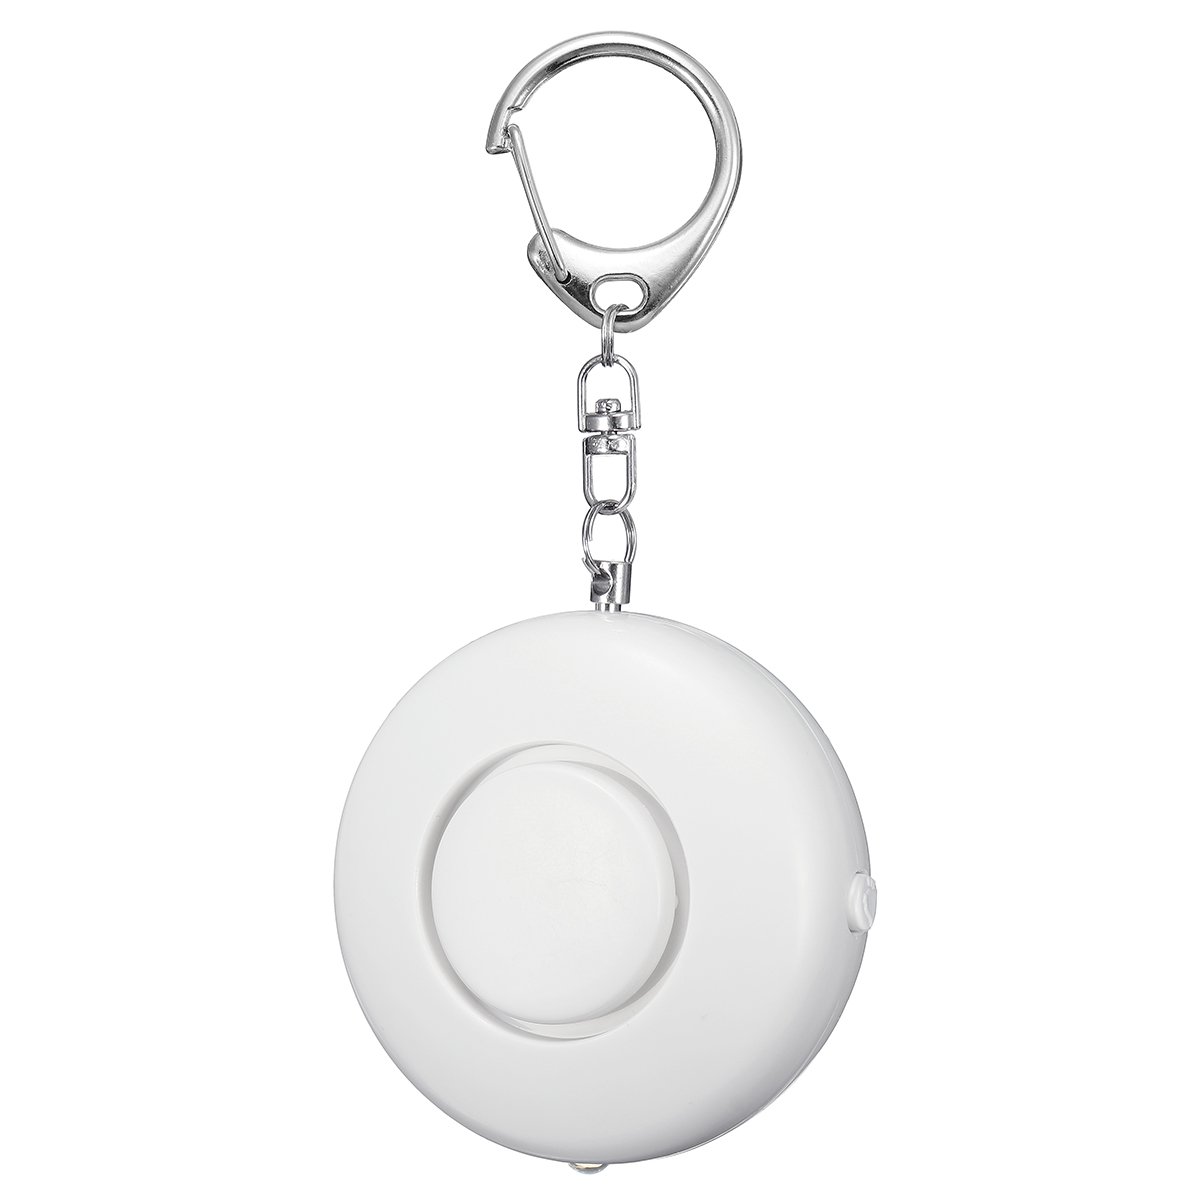 125dB Loud Portable Round Shape Bag Keychain Anti Theft Personal Security Alarm with Bright LED Light 1